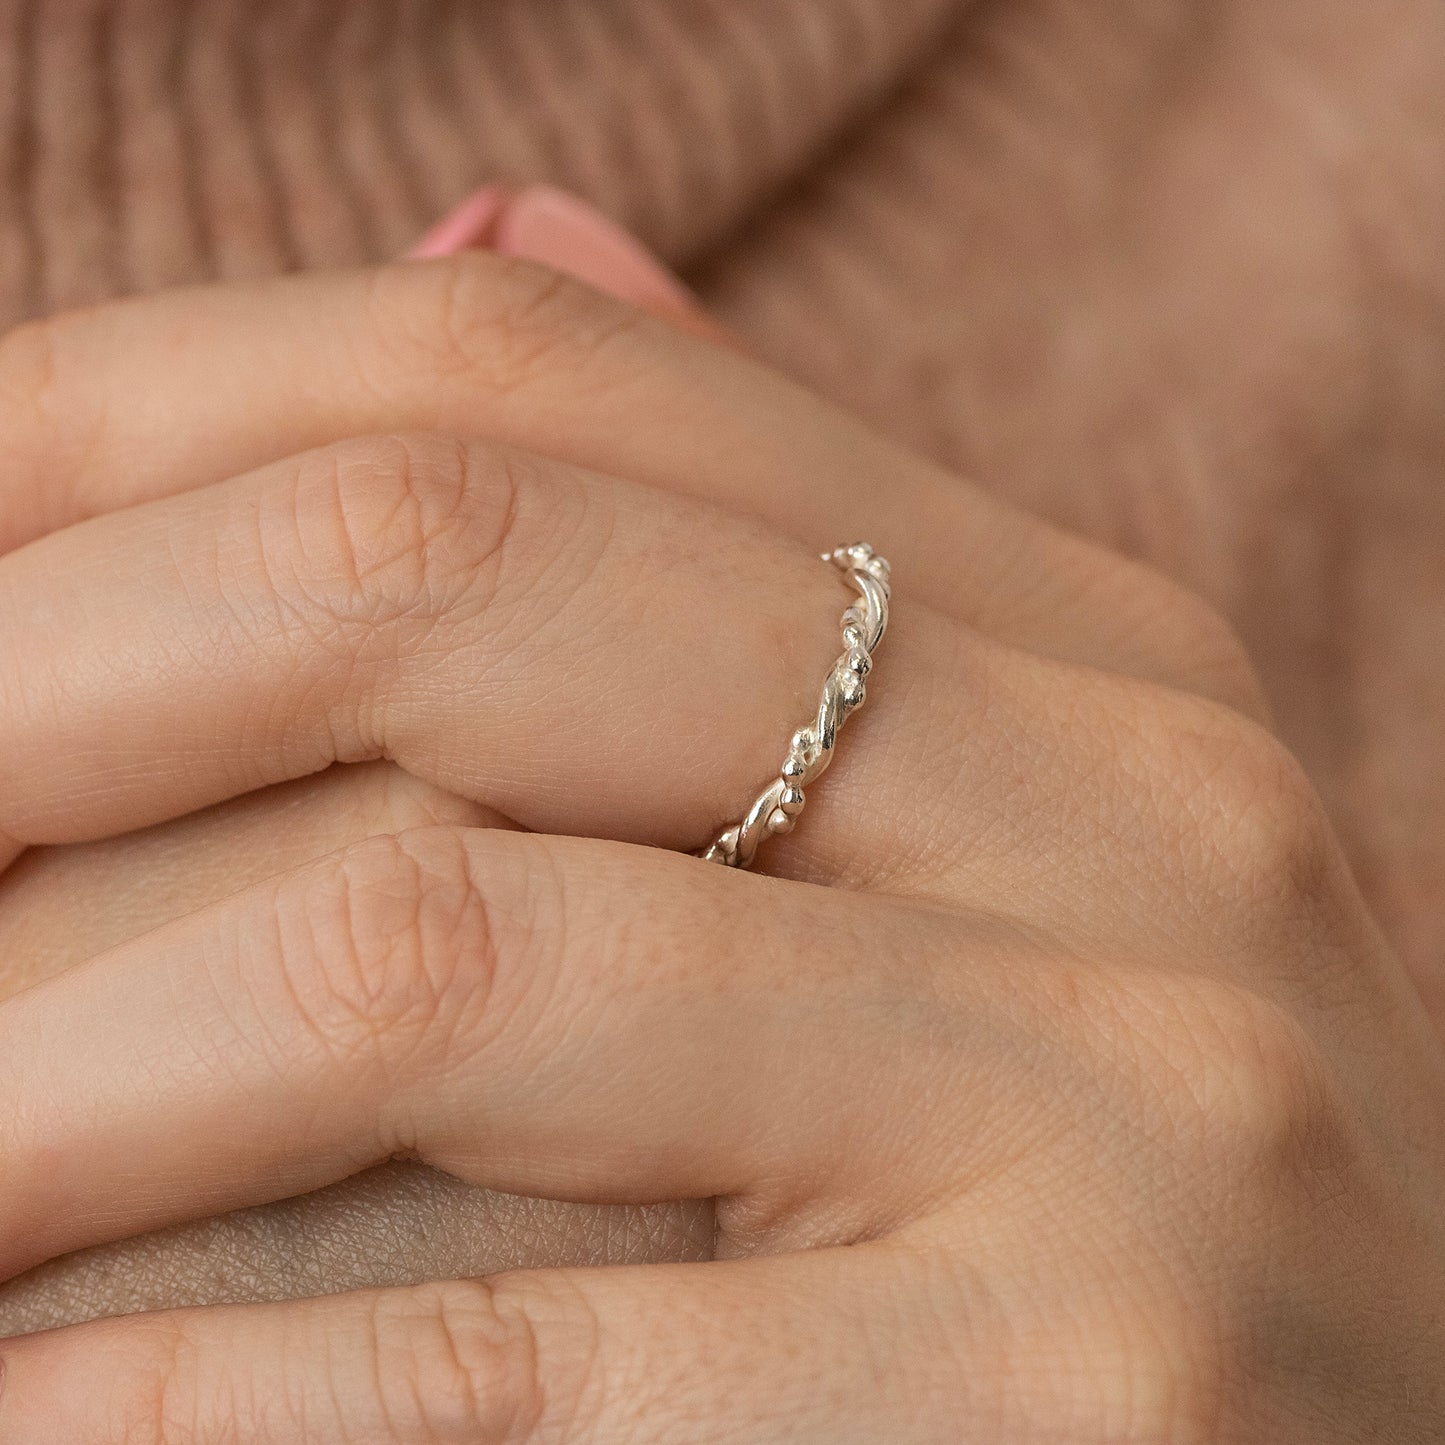 Entwined Ring- Linked for a Lifetime